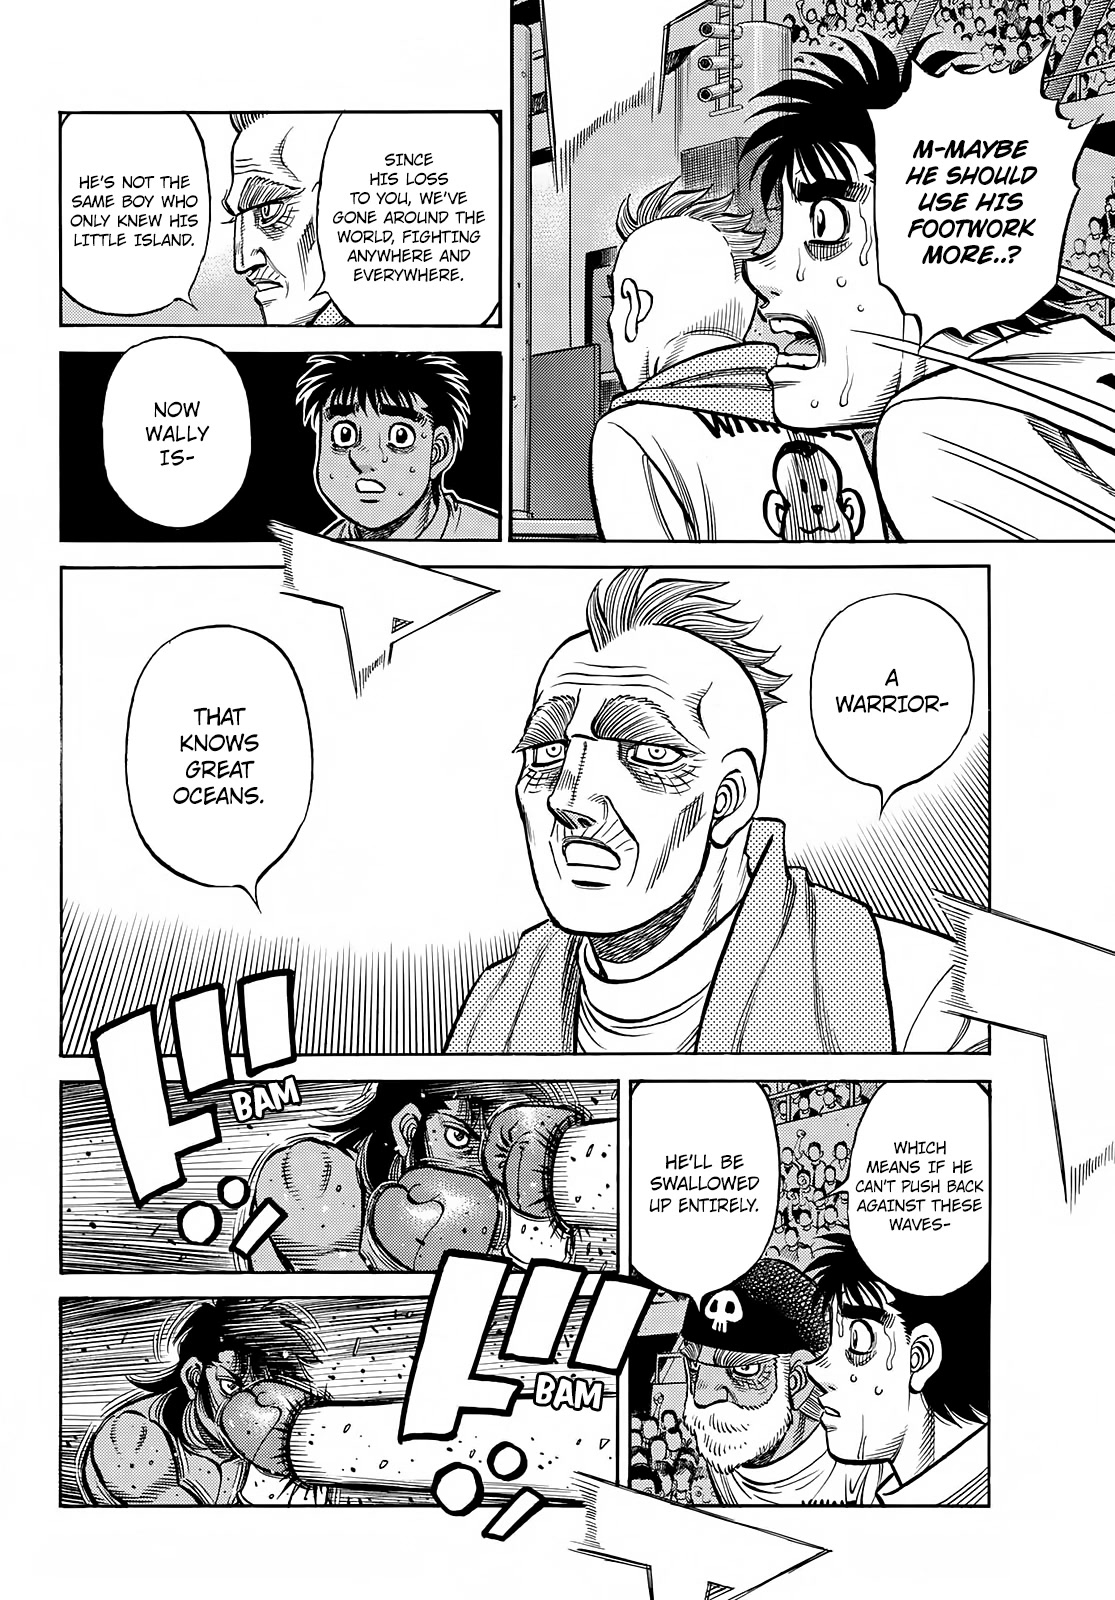 Hajime no Ippo, Chapter 1401 A Warrior That Knows Great Oceans image 07